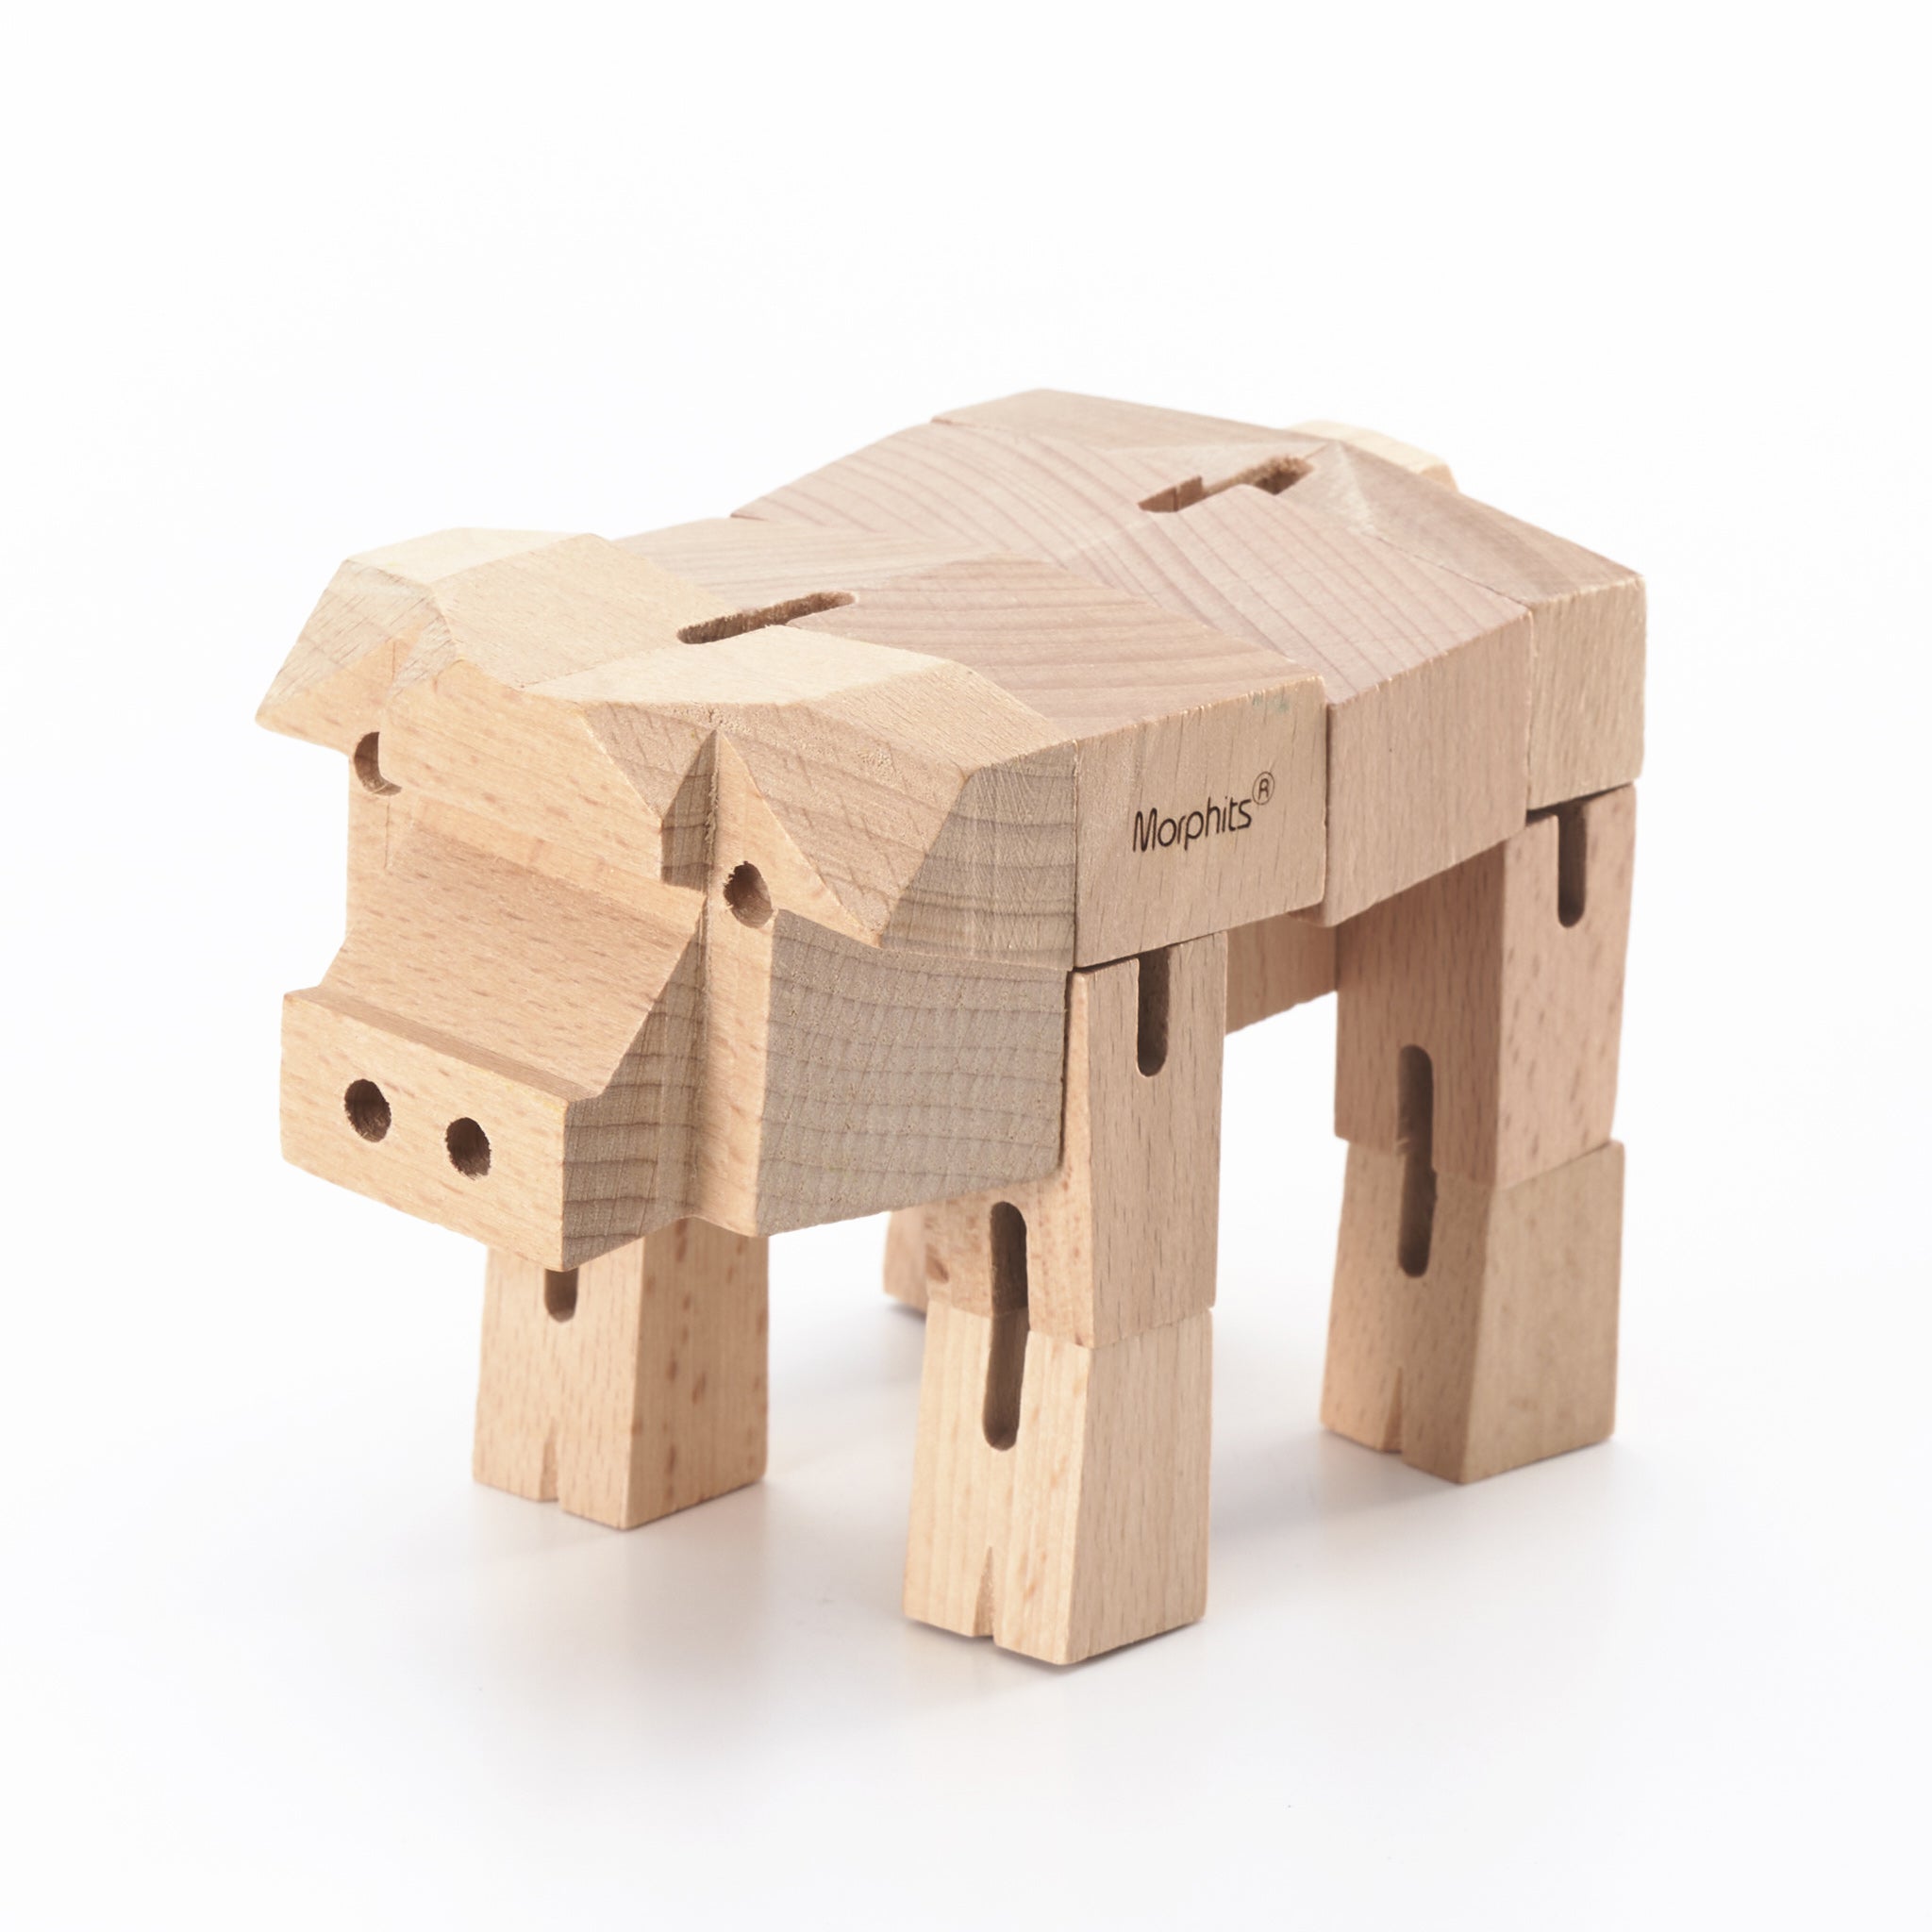 Morphits ® Pig Wooden Toy: Whimsical Wooden Playset Companions for Imaginative Minds - Yoshiaki Ito Design Stand N1